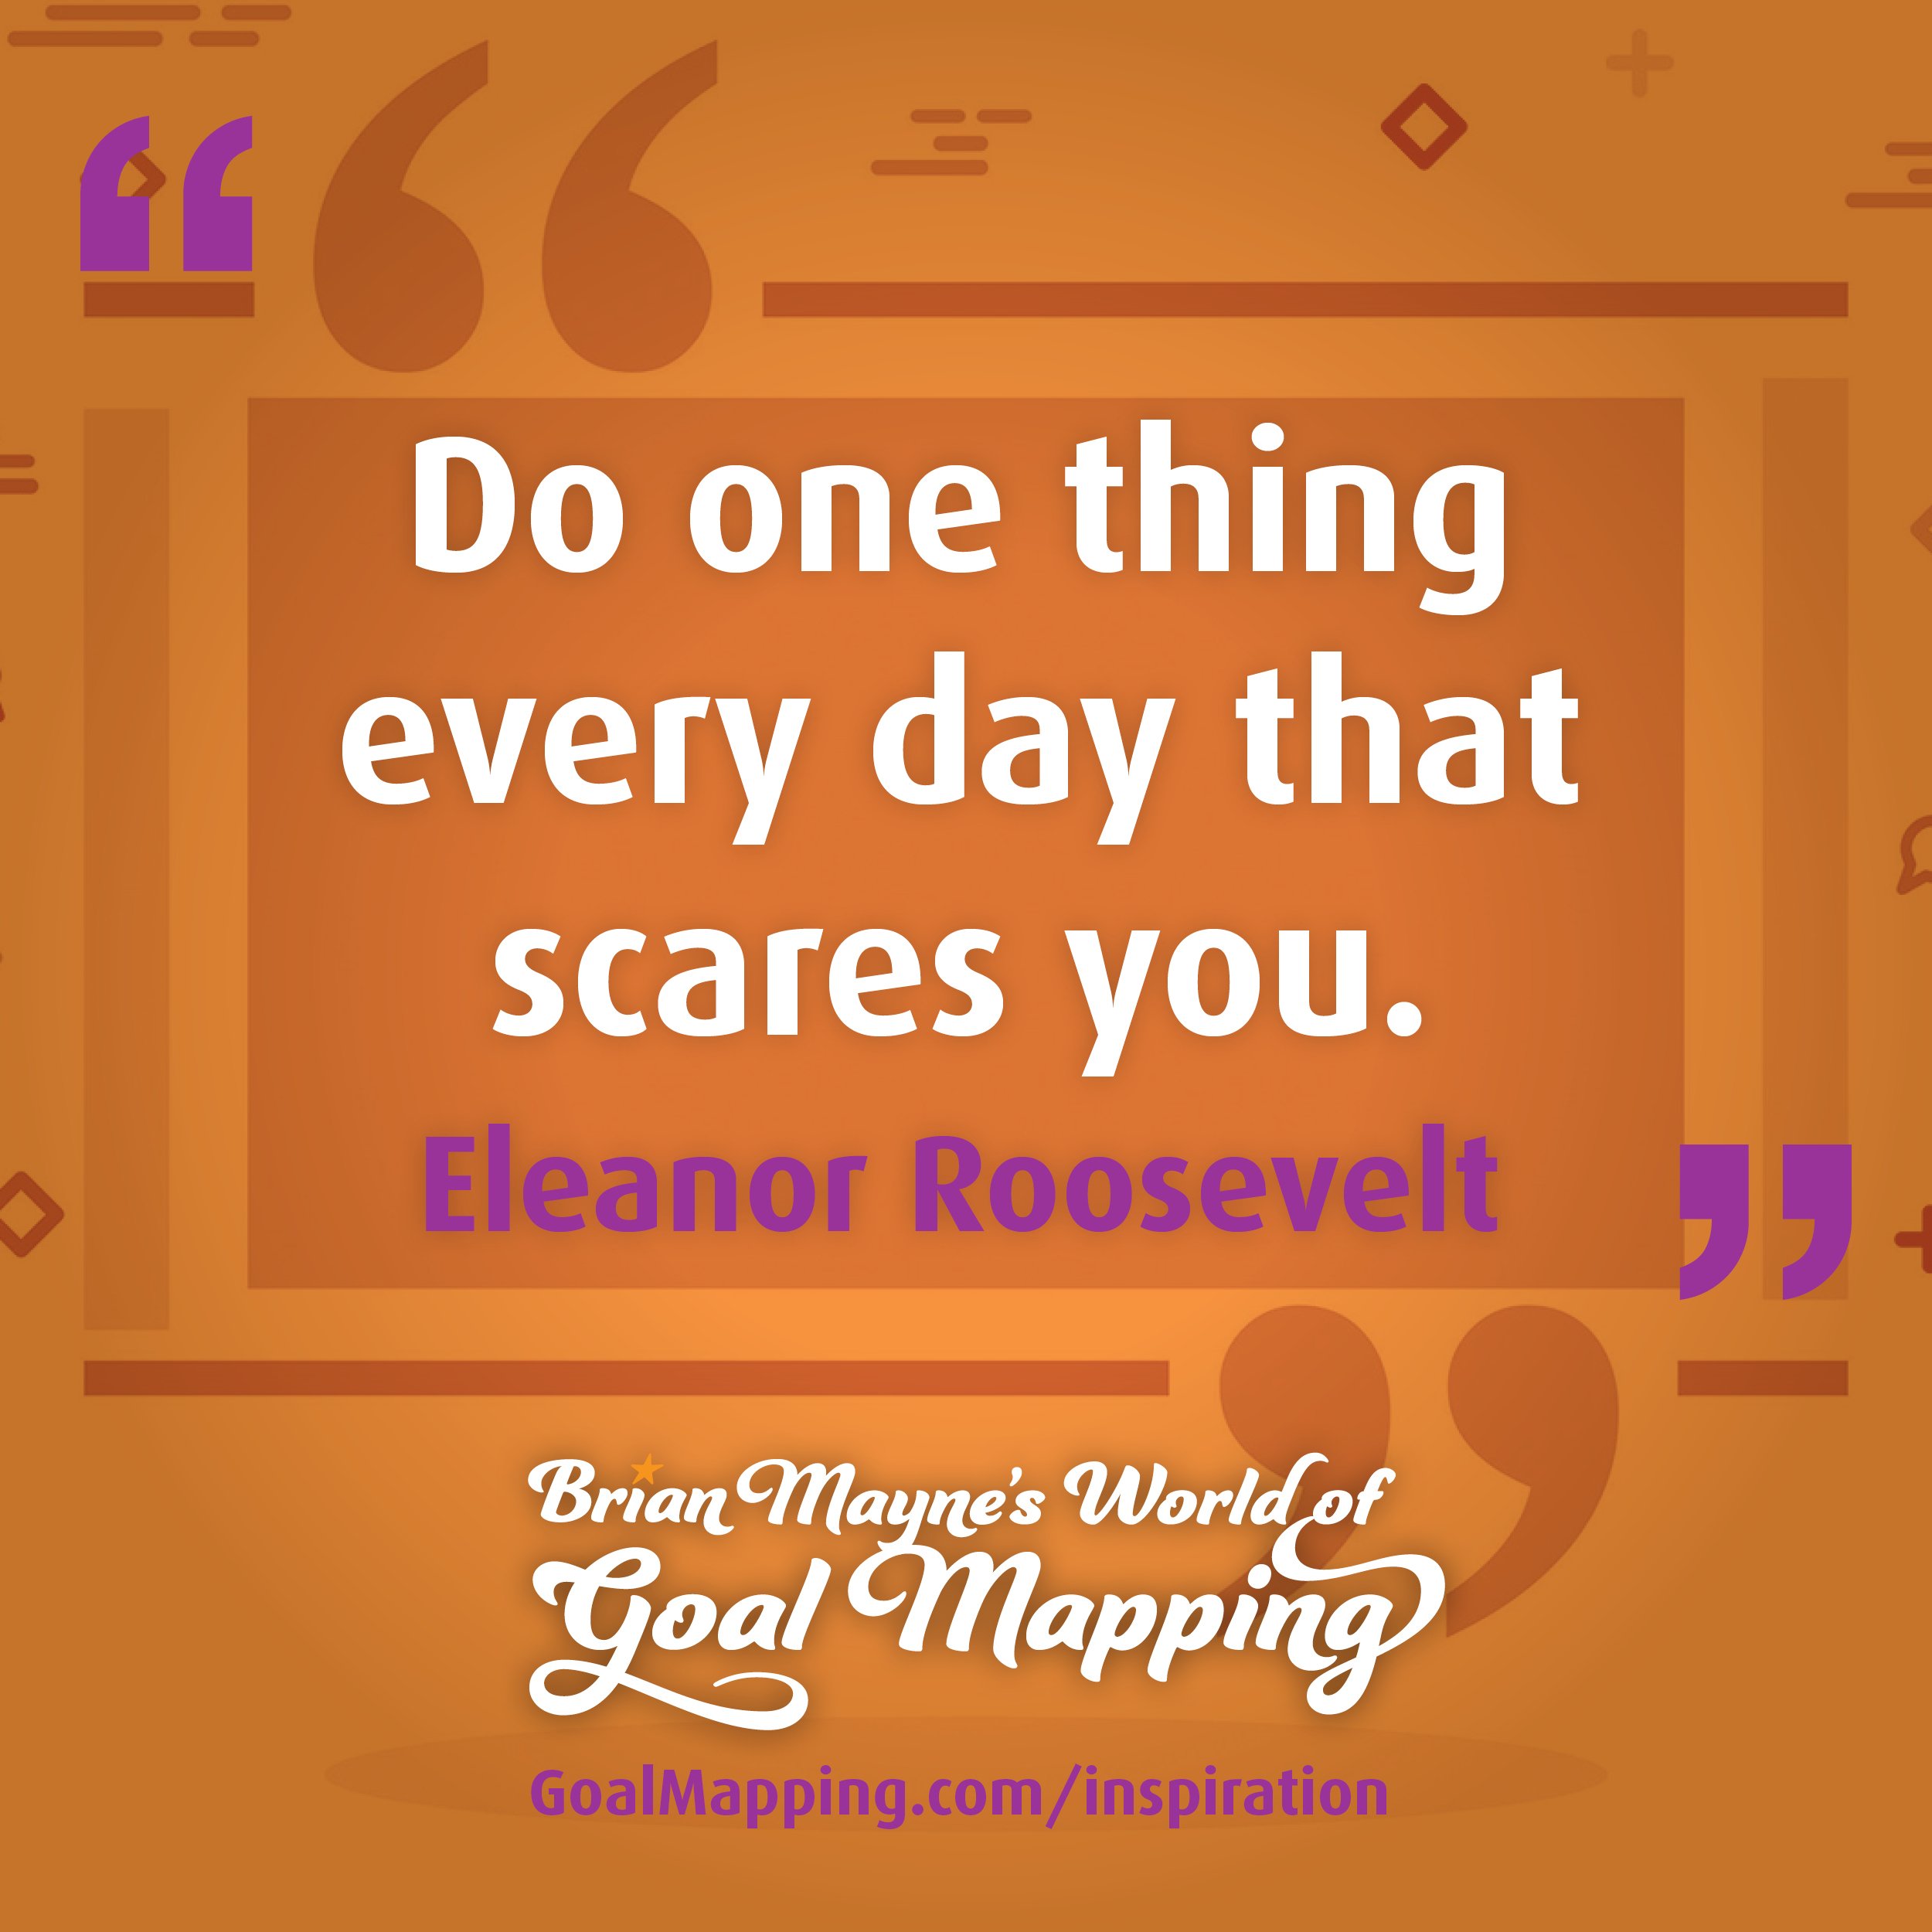 "Do one thing every day that scares you." Eleanor Roosevelt